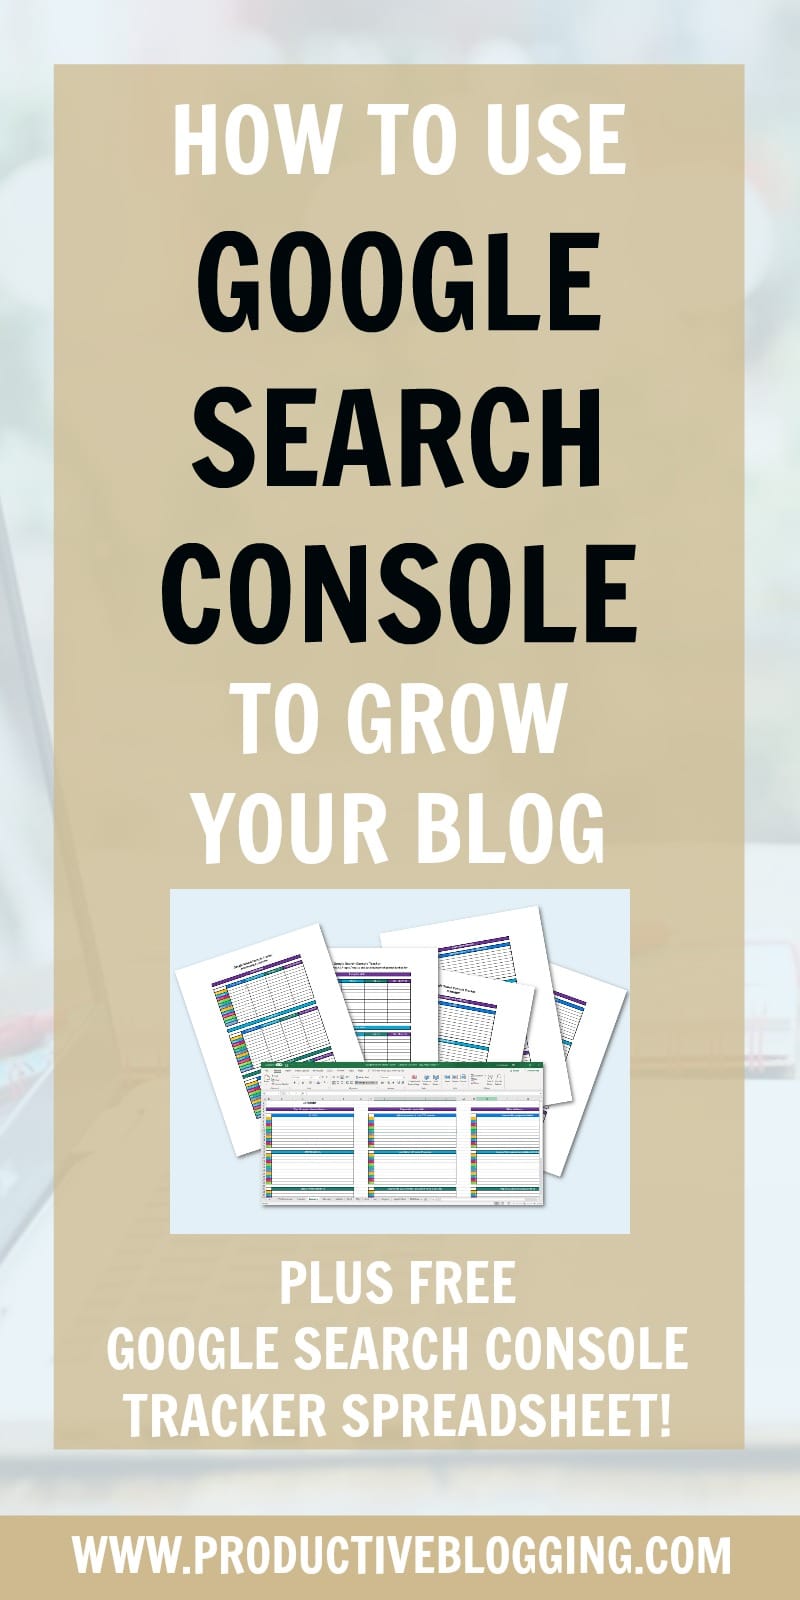 Want to know what is one of the best FREE TOOLS to grow your website? Google Search Console! Read on to discover how to use Google Search Console to grow your blog traffic this year. #GoogleSearchConsole #GSC #SEO #SEOtips #searchengineoptimization #keywords #yoastplugin #yoast #yoastseo #growyourblog #bloggrowth #bloggrowthhacks #bloggingtips #blogginghacks #blogsmarter #blogsmarternotharder #productiveblogging